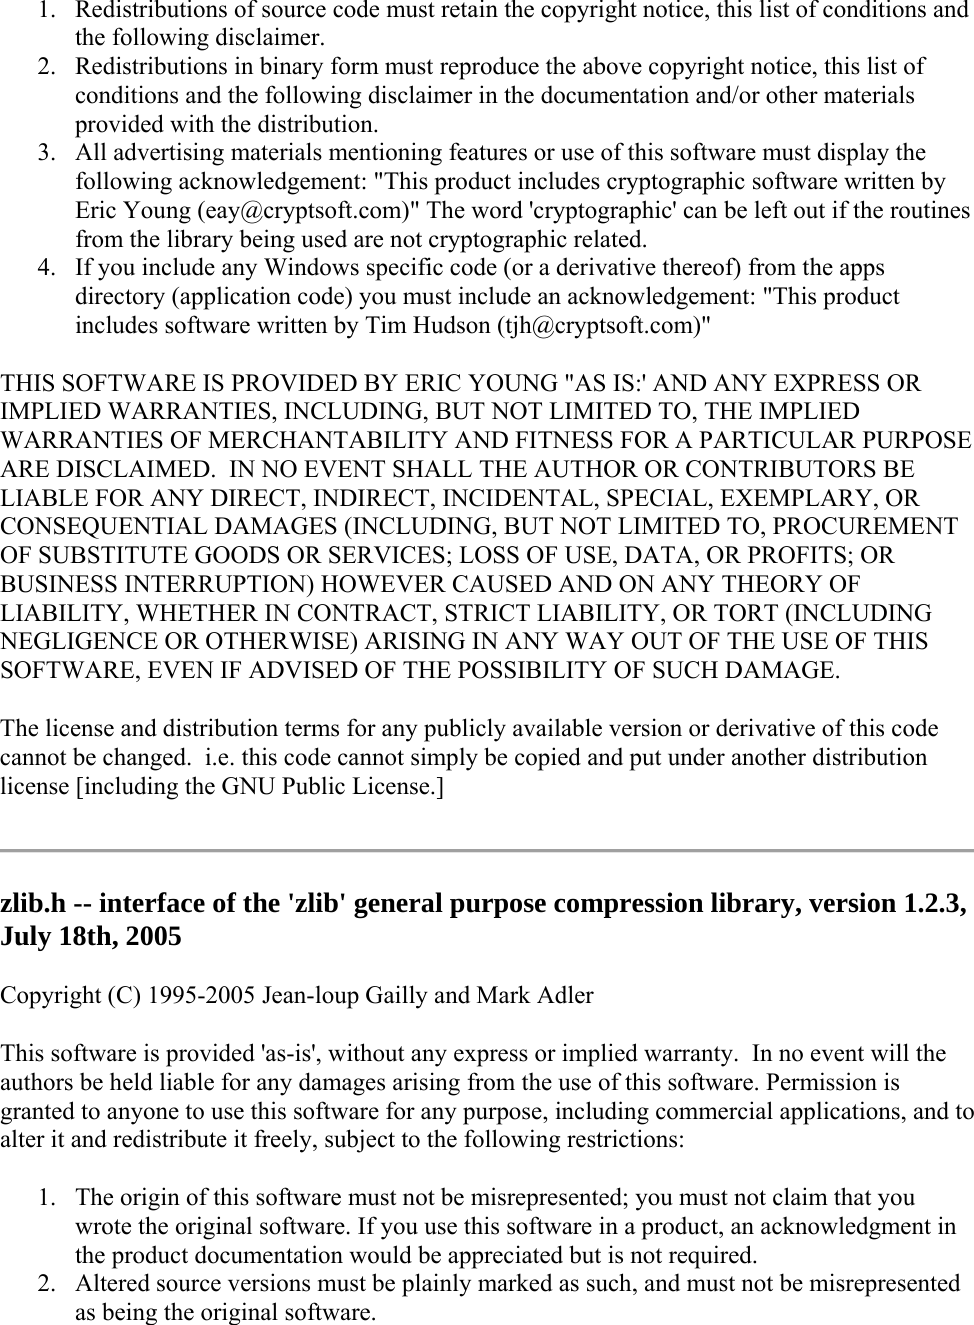 1. Redistributions of source code must retain the copyright notice, this list of conditions and the following disclaimer. 2. Redistributions in binary form must reproduce the above copyright notice, this list of conditions and the following disclaimer in the documentation and/or other materials provided with the distribution. 3. All advertising materials mentioning features or use of this software must display the following acknowledgement: &quot;This product includes cryptographic software written by Eric Young (eay@cryptsoft.com)&quot; The word &apos;cryptographic&apos; can be left out if the routines from the library being used are not cryptographic related.  4. If you include any Windows specific code (or a derivative thereof) from the apps directory (application code) you must include an acknowledgement: &quot;This product includes software written by Tim Hudson (tjh@cryptsoft.com)&quot; THIS SOFTWARE IS PROVIDED BY ERIC YOUNG &quot;AS IS:&apos; AND ANY EXPRESS OR IMPLIED WARRANTIES, INCLUDING, BUT NOT LIMITED TO, THE IMPLIED WARRANTIES OF MERCHANTABILITY AND FITNESS FOR A PARTICULAR PURPOSE ARE DISCLAIMED.  IN NO EVENT SHALL THE AUTHOR OR CONTRIBUTORS BE LIABLE FOR ANY DIRECT, INDIRECT, INCIDENTAL, SPECIAL, EXEMPLARY, OR CONSEQUENTIAL DAMAGES (INCLUDING, BUT NOT LIMITED TO, PROCUREMENT OF SUBSTITUTE GOODS OR SERVICES; LOSS OF USE, DATA, OR PROFITS; OR BUSINESS INTERRUPTION) HOWEVER CAUSED AND ON ANY THEORY OF LIABILITY, WHETHER IN CONTRACT, STRICT LIABILITY, OR TORT (INCLUDING NEGLIGENCE OR OTHERWISE) ARISING IN ANY WAY OUT OF THE USE OF THIS SOFTWARE, EVEN IF ADVISED OF THE POSSIBILITY OF SUCH DAMAGE. The license and distribution terms for any publicly available version or derivative of this code cannot be changed.  i.e. this code cannot simply be copied and put under another distribution license [including the GNU Public License.]  zlib.h -- interface of the &apos;zlib&apos; general purpose compression library, version 1.2.3, July 18th, 2005 Copyright (C) 1995-2005 Jean-loup Gailly and Mark Adler This software is provided &apos;as-is&apos;, without any express or implied warranty.  In no event will the authors be held liable for any damages arising from the use of this software. Permission is granted to anyone to use this software for any purpose, including commercial applications, and to alter it and redistribute it freely, subject to the following restrictions: 1. The origin of this software must not be misrepresented; you must not claim that you wrote the original software. If you use this software in a product, an acknowledgment in the product documentation would be appreciated but is not required. 2. Altered source versions must be plainly marked as such, and must not be misrepresented as being the original software. 